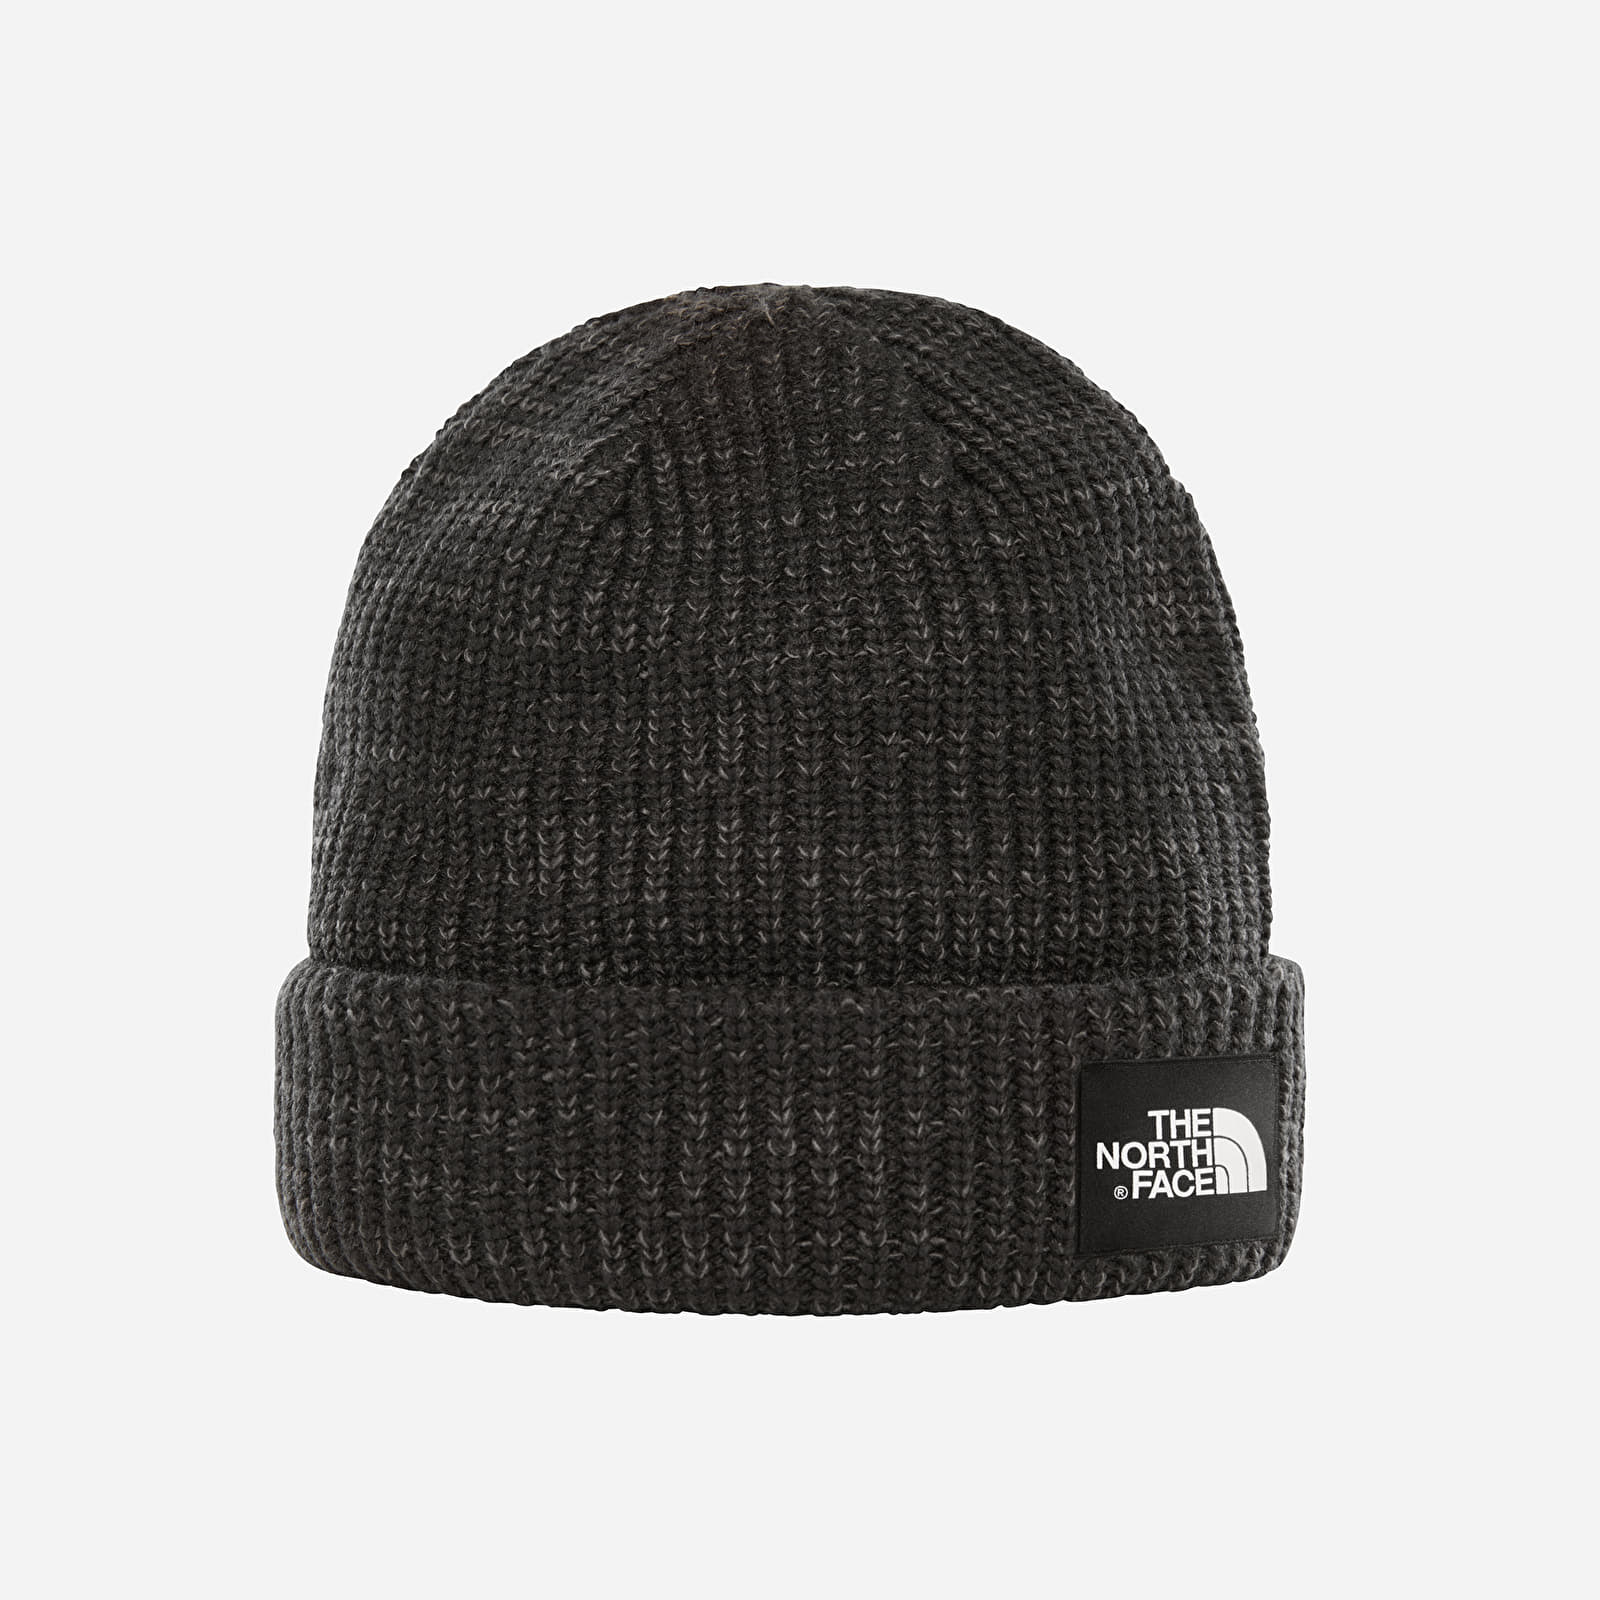 Hats The North Face Salty Dog Beanie Regular Fit Tnf Black